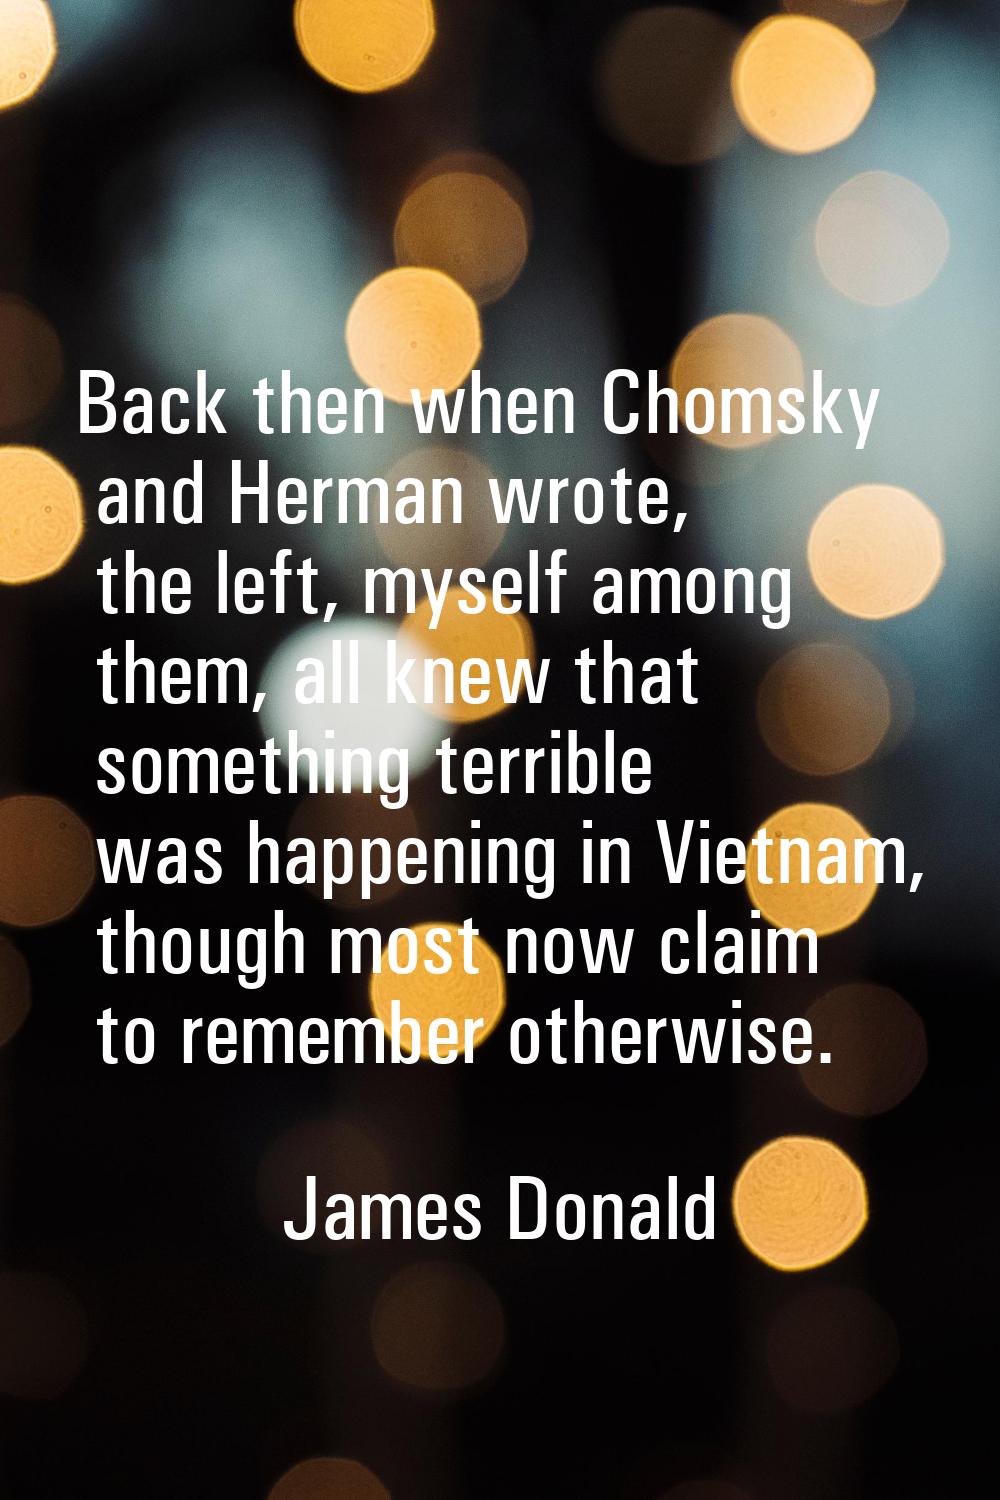 Back then when Chomsky and Herman wrote, the left, myself among them, all knew that something terri